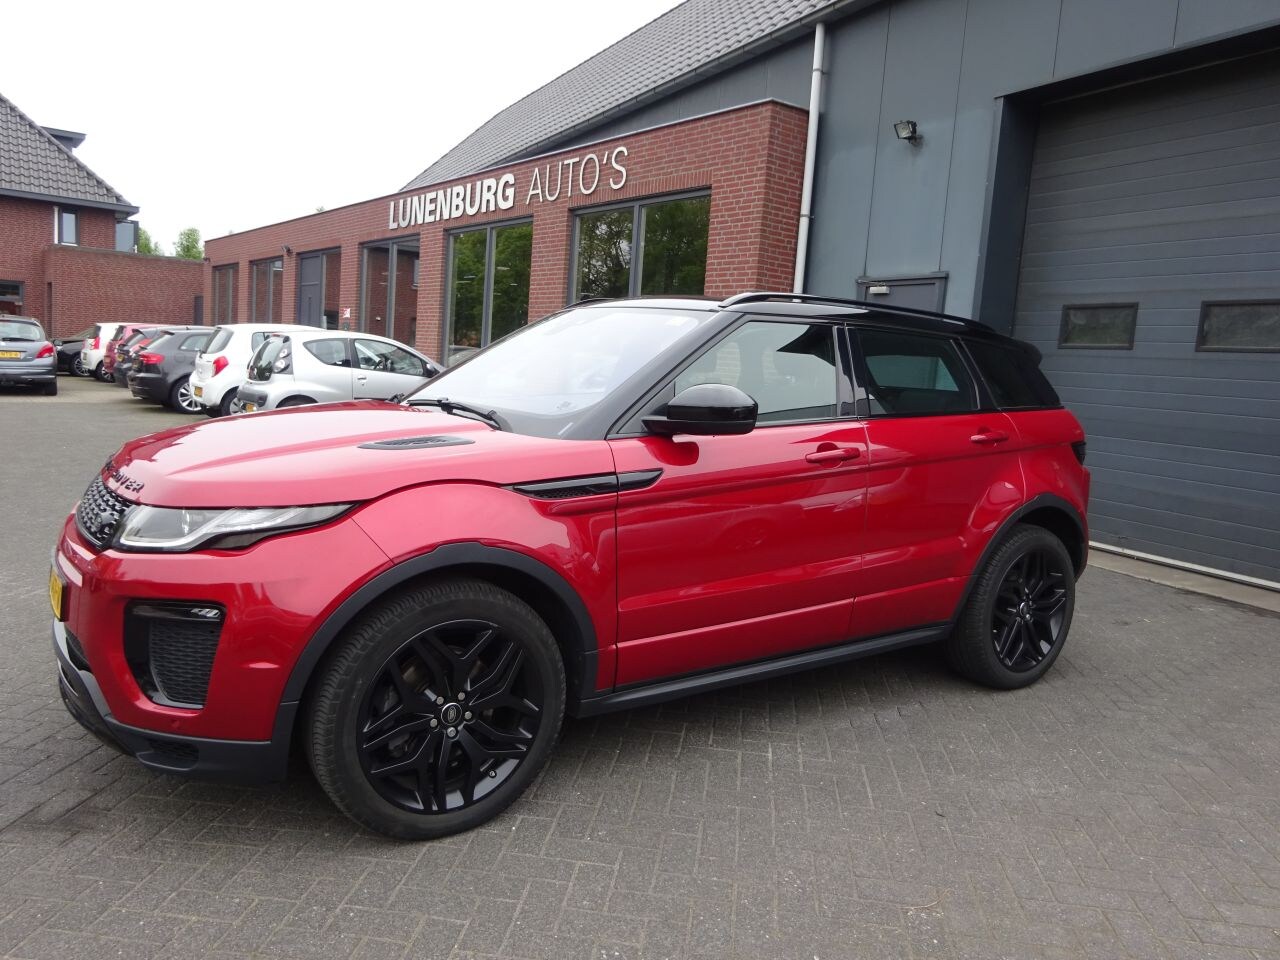 Land Rover Range Rover Evoque - 2.0 Si4 HSE Dynamic AUTOMAAT PANORAMA 177KW - AutoWereld.nl